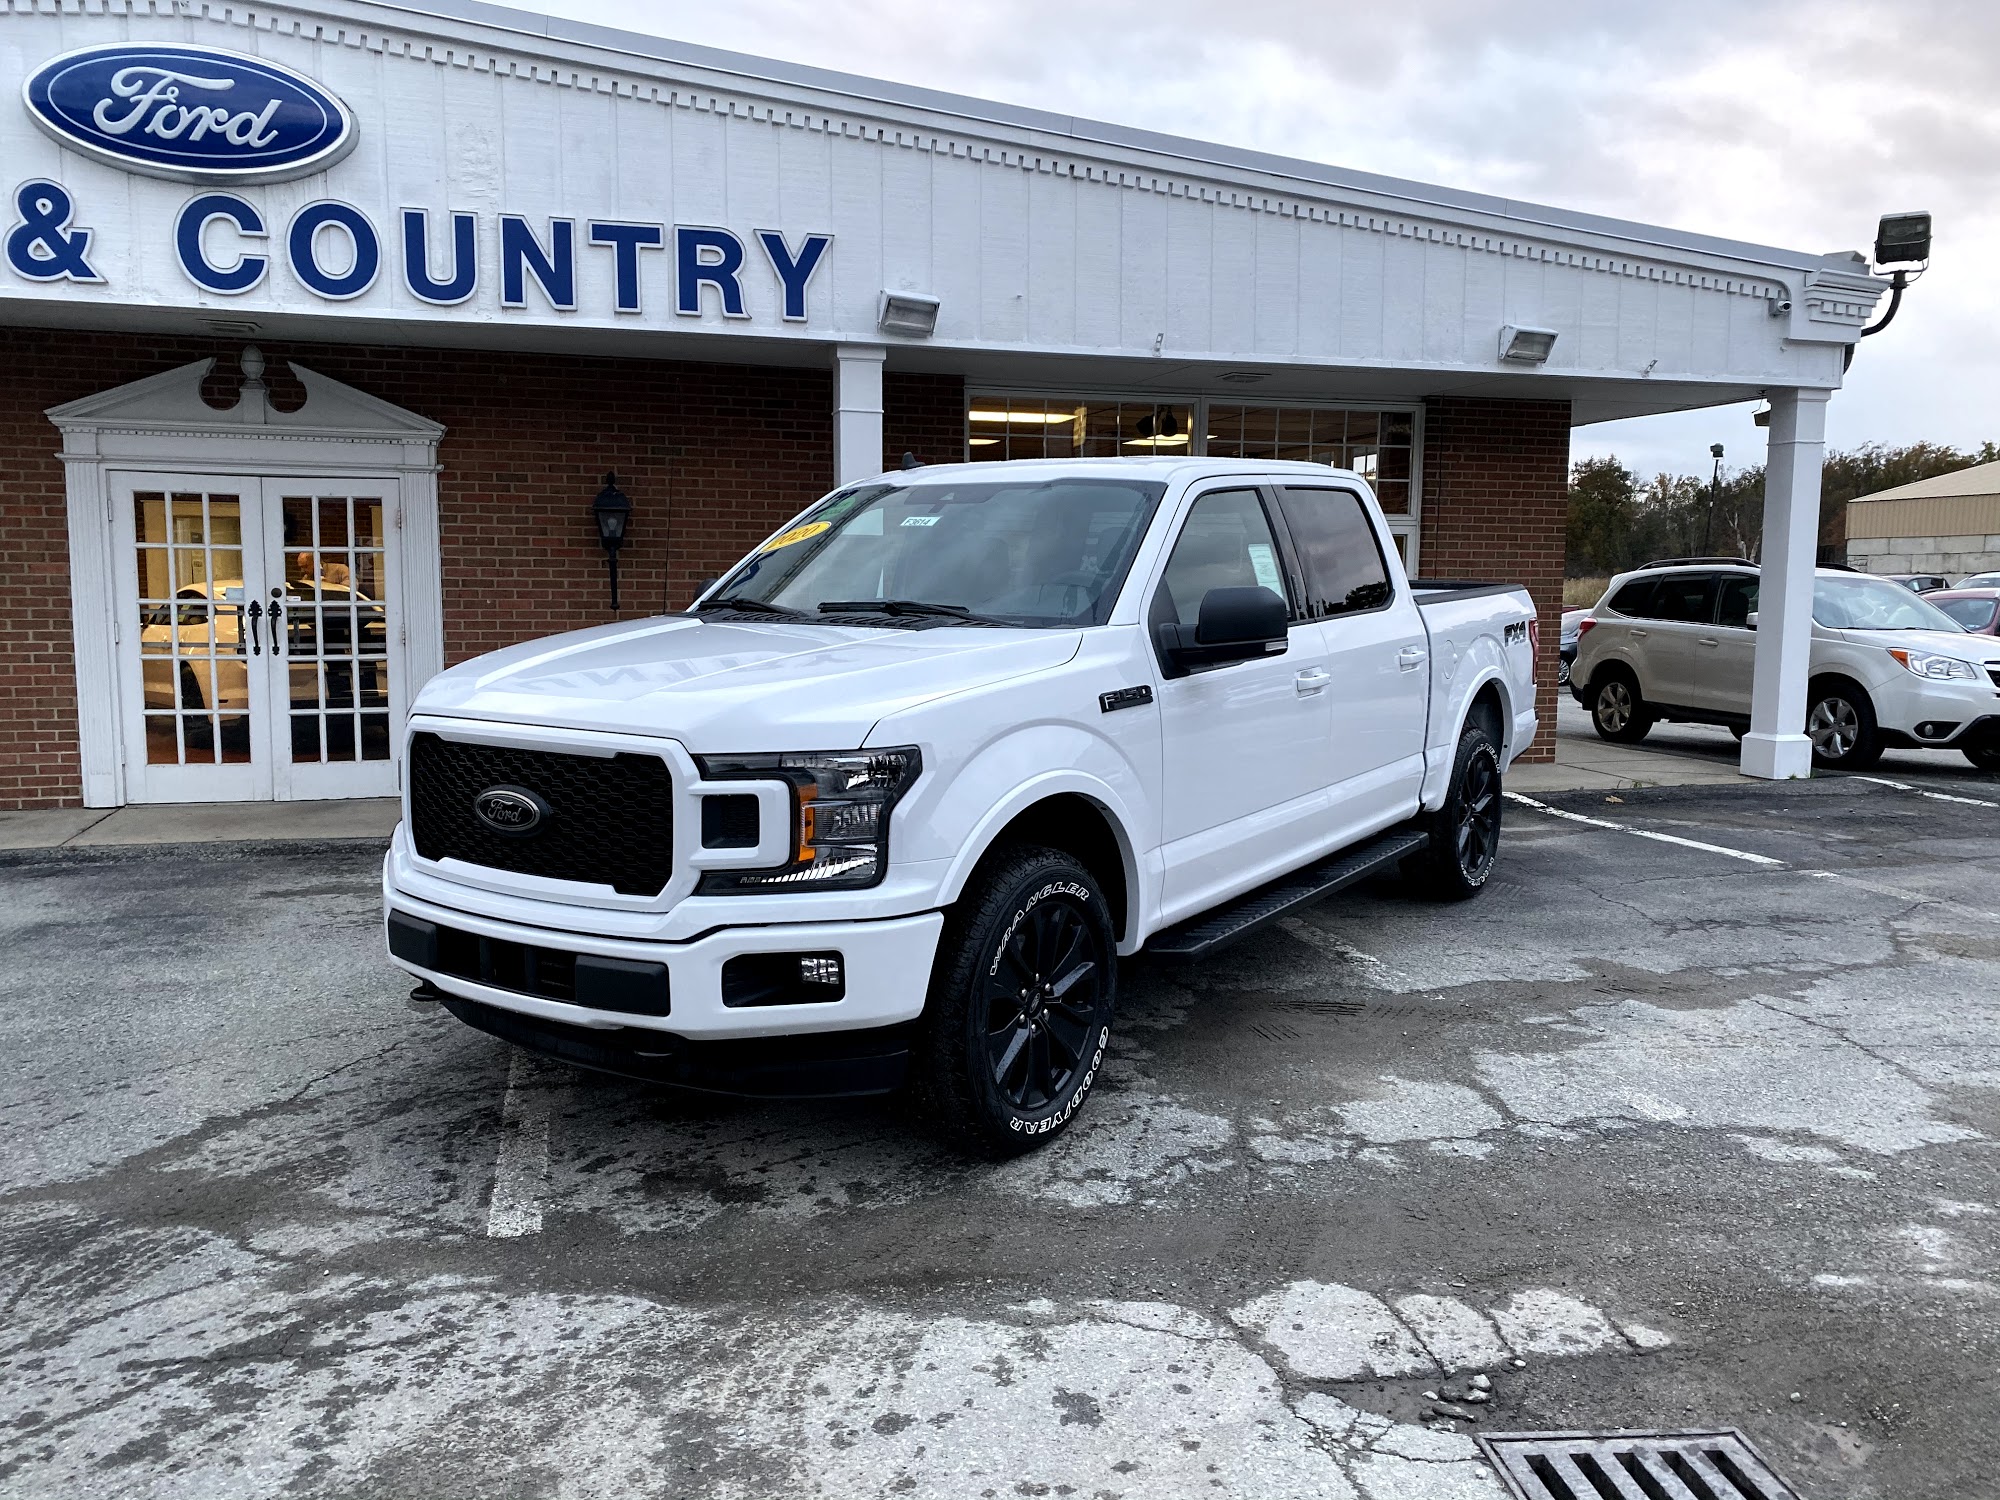 Town & Country Ford